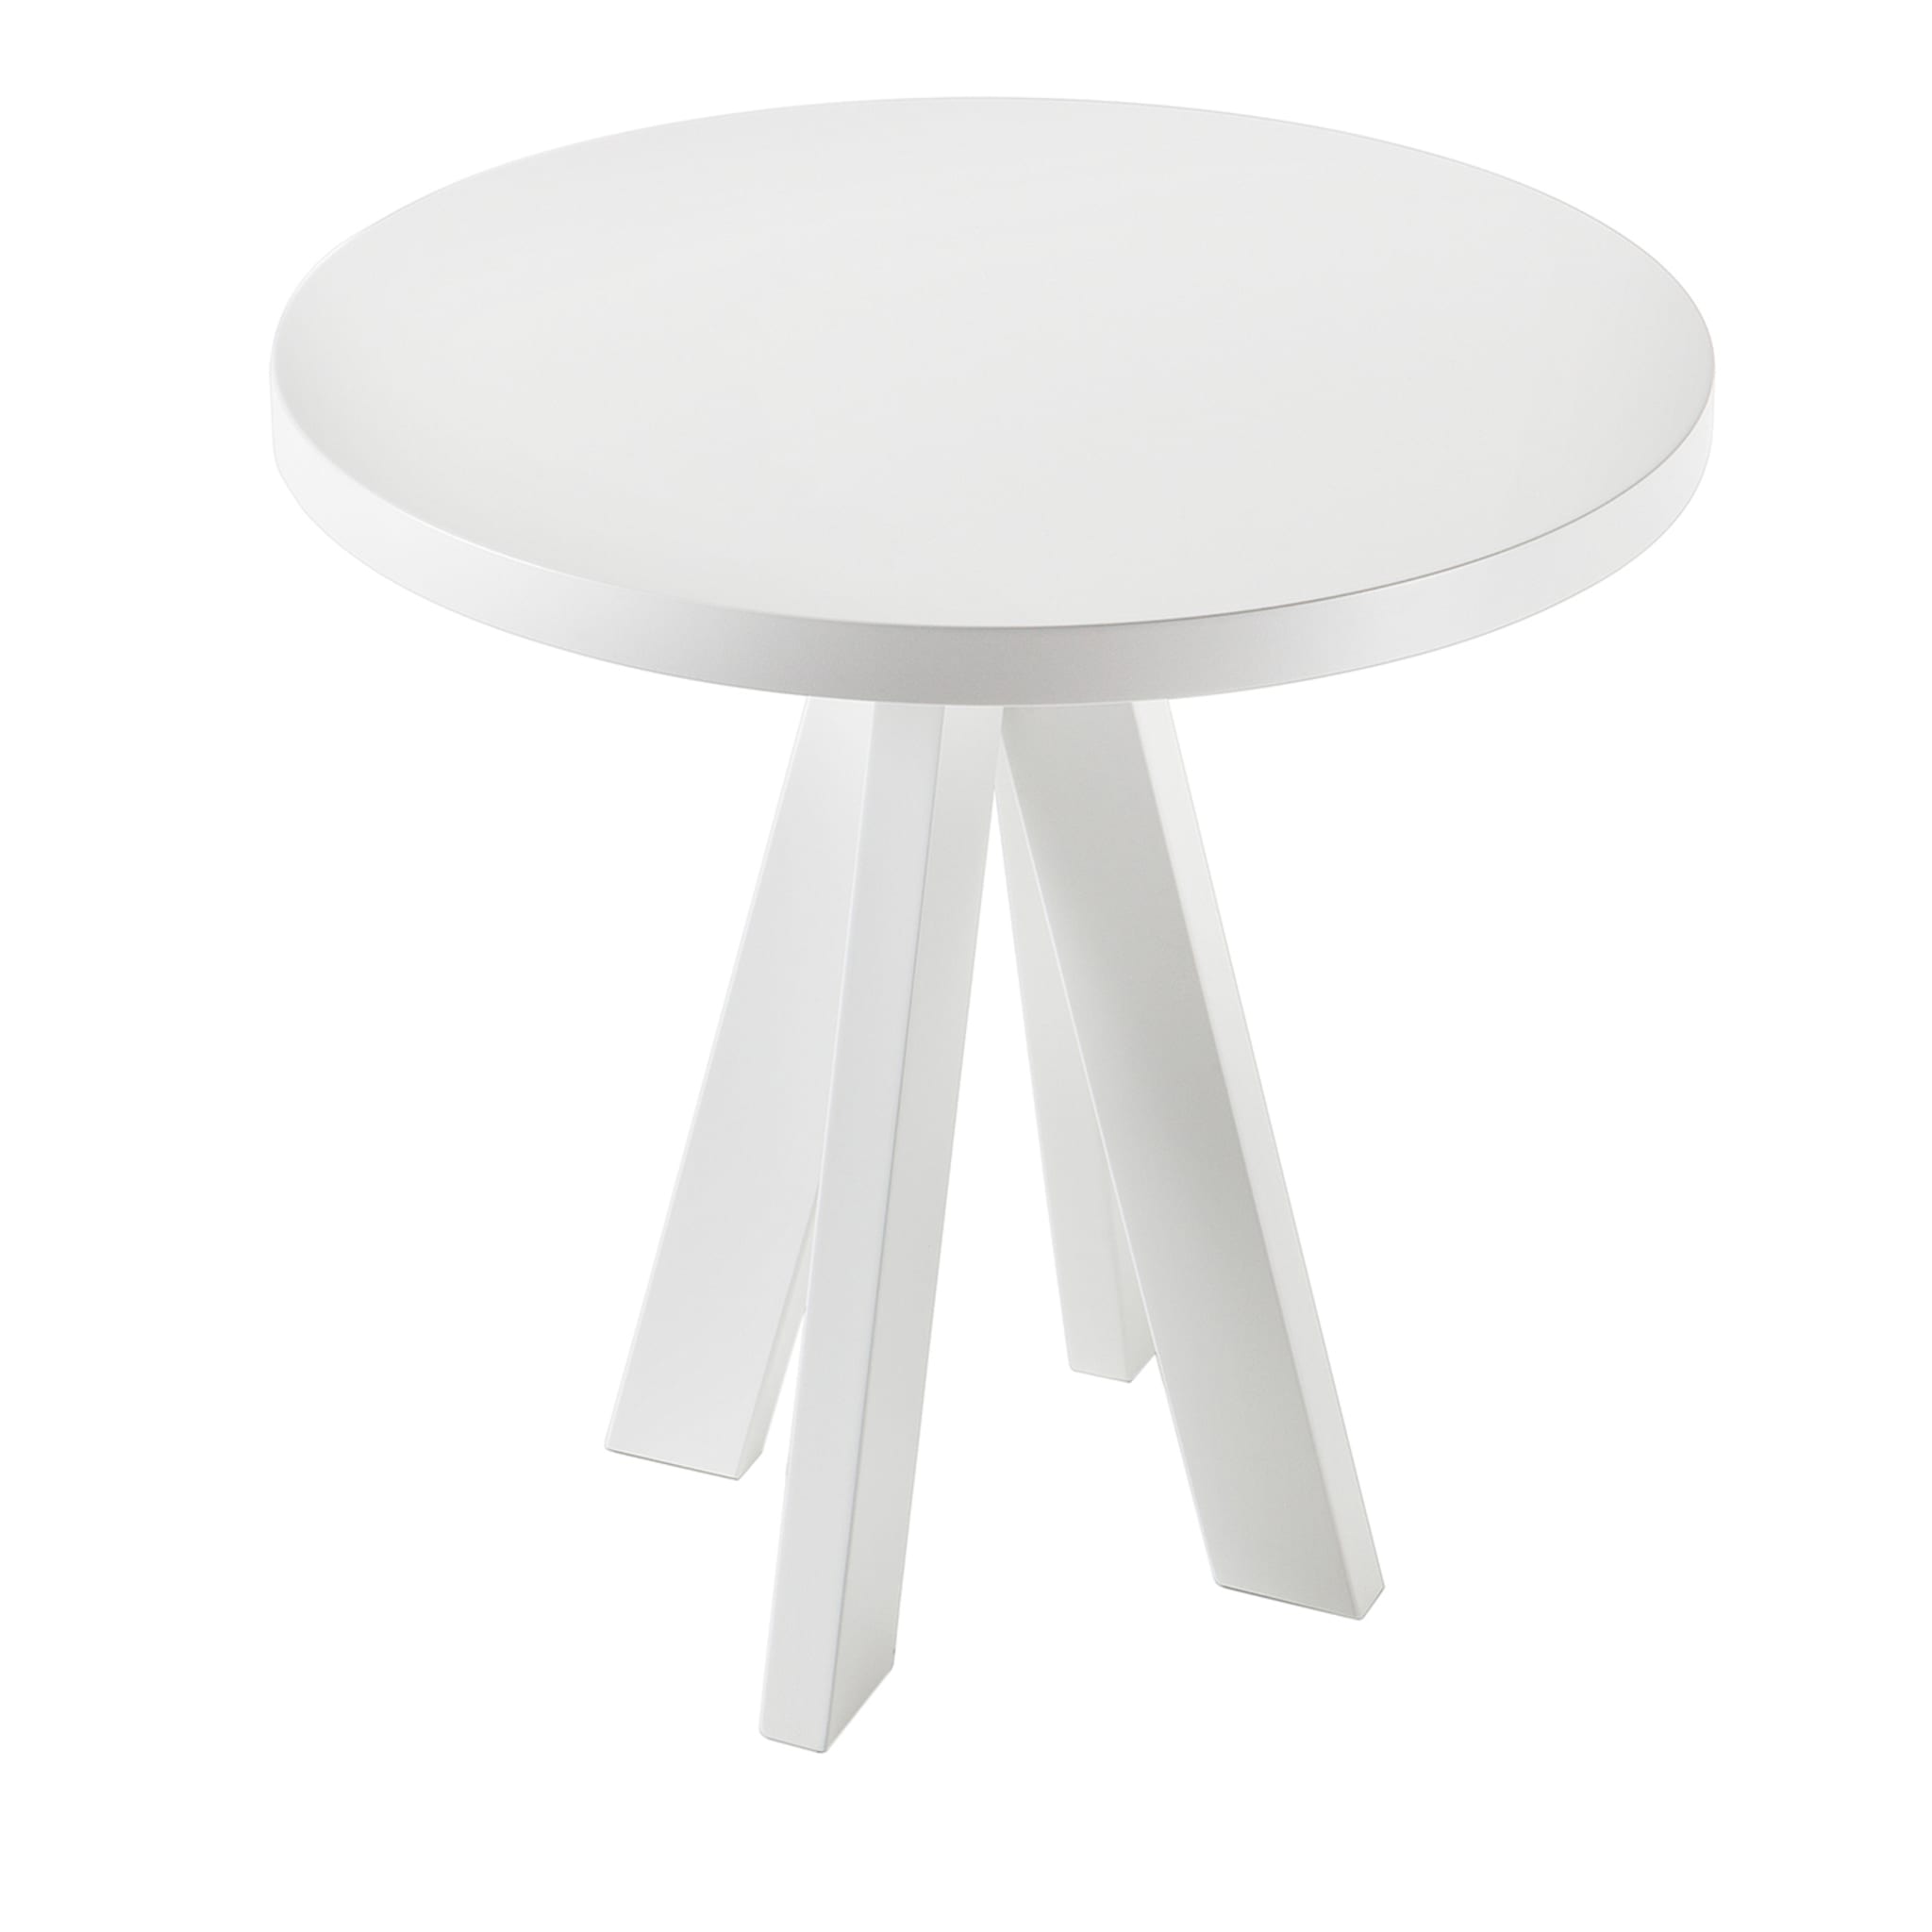 A.ngelo Table d'appoint blanche - Vue principale